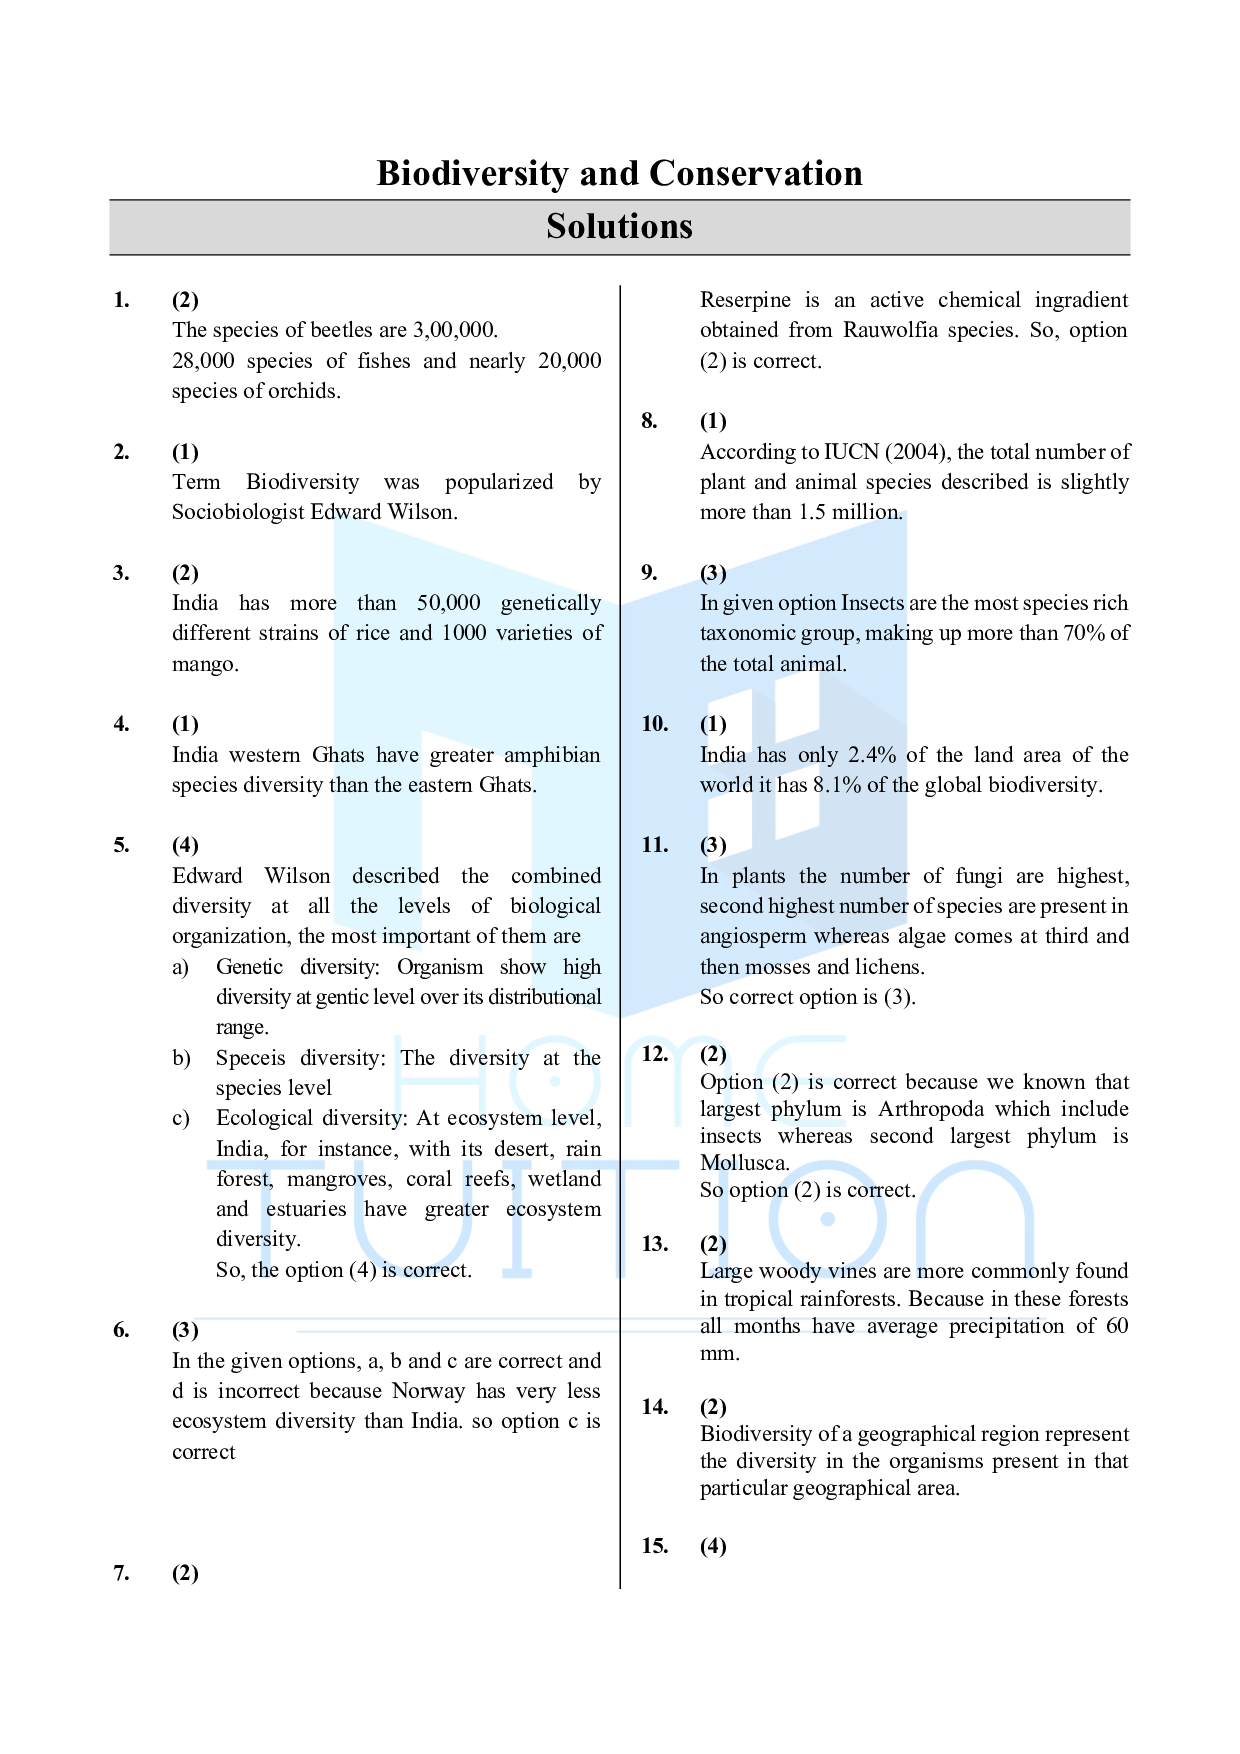 Biology MCQ Questions for CUET Chapter 15 Biodiversity and Conservation